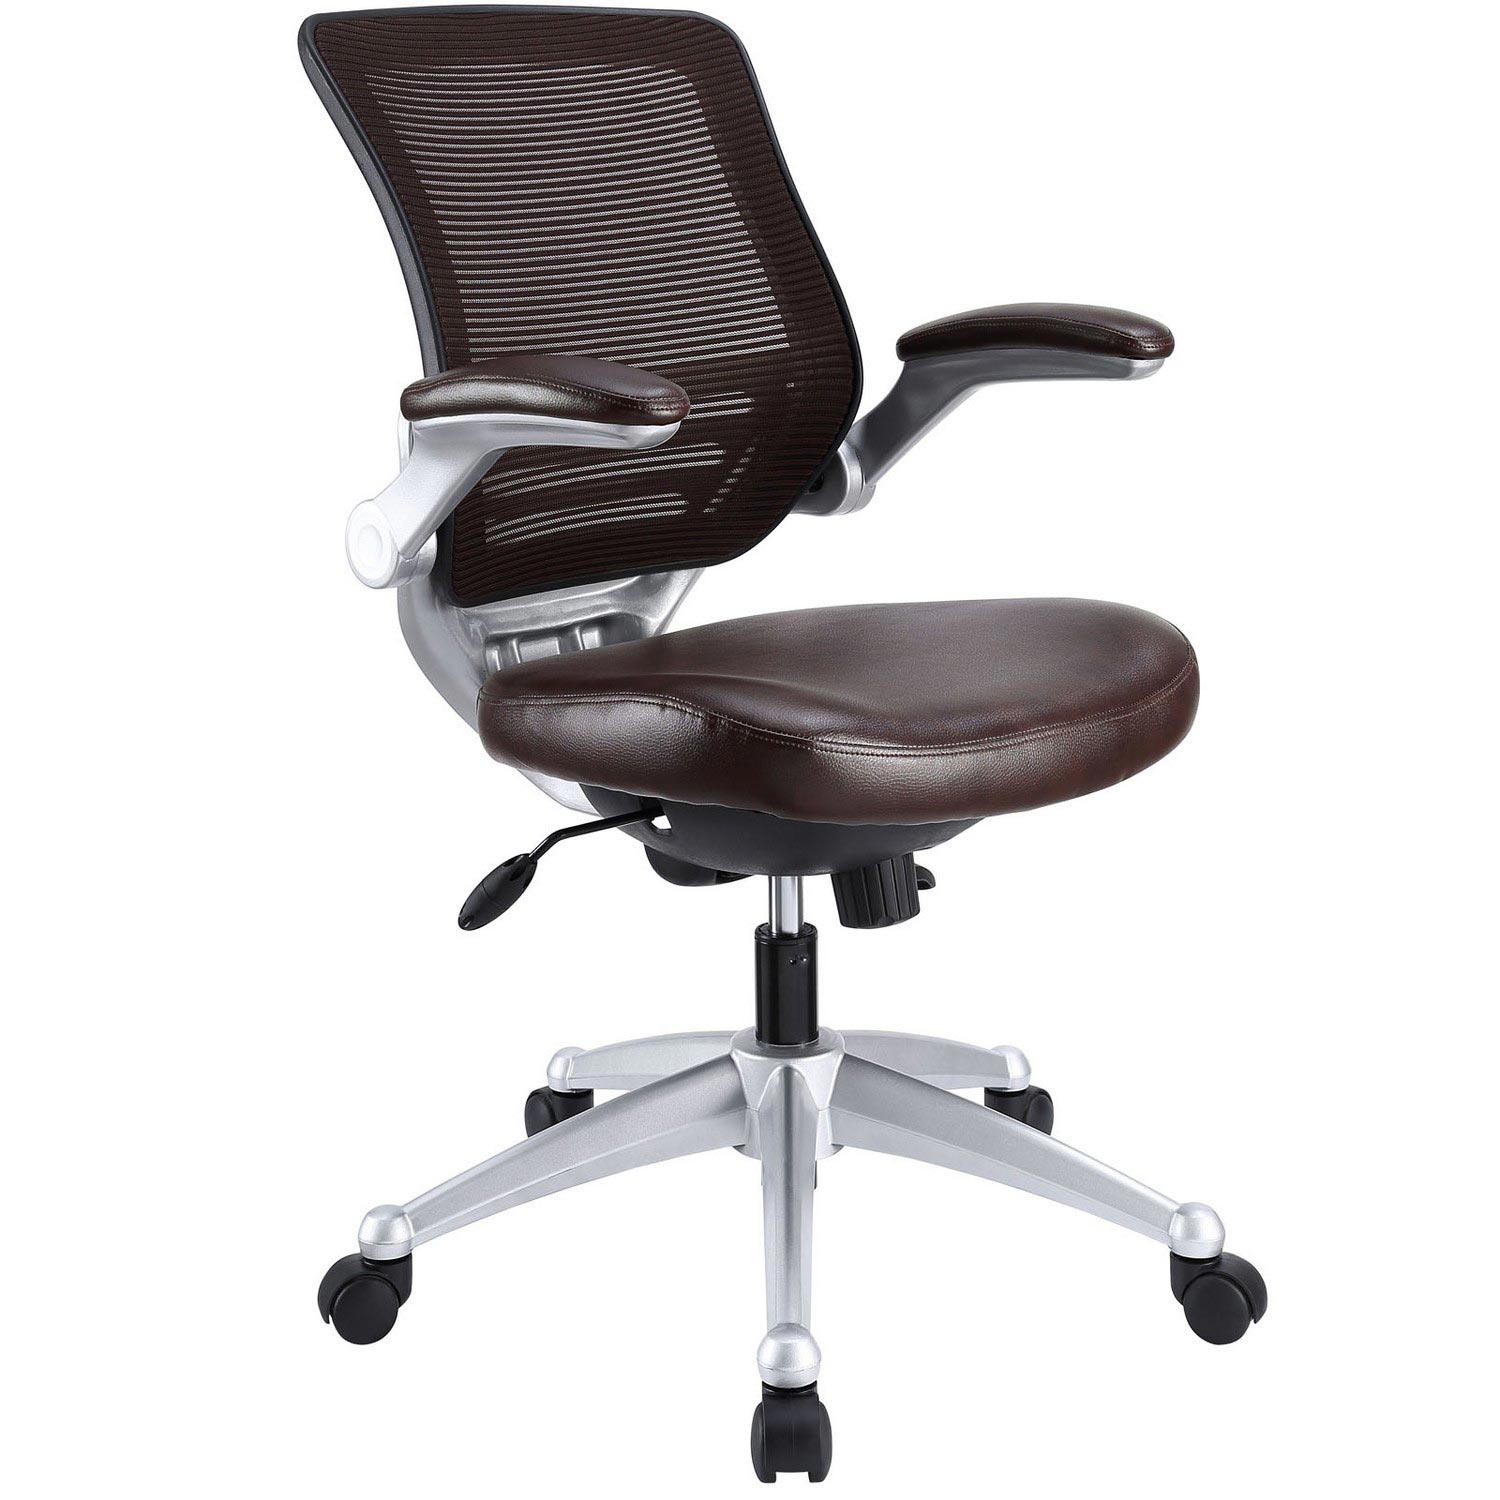 Modway Edge Leather Office Chair - Brown